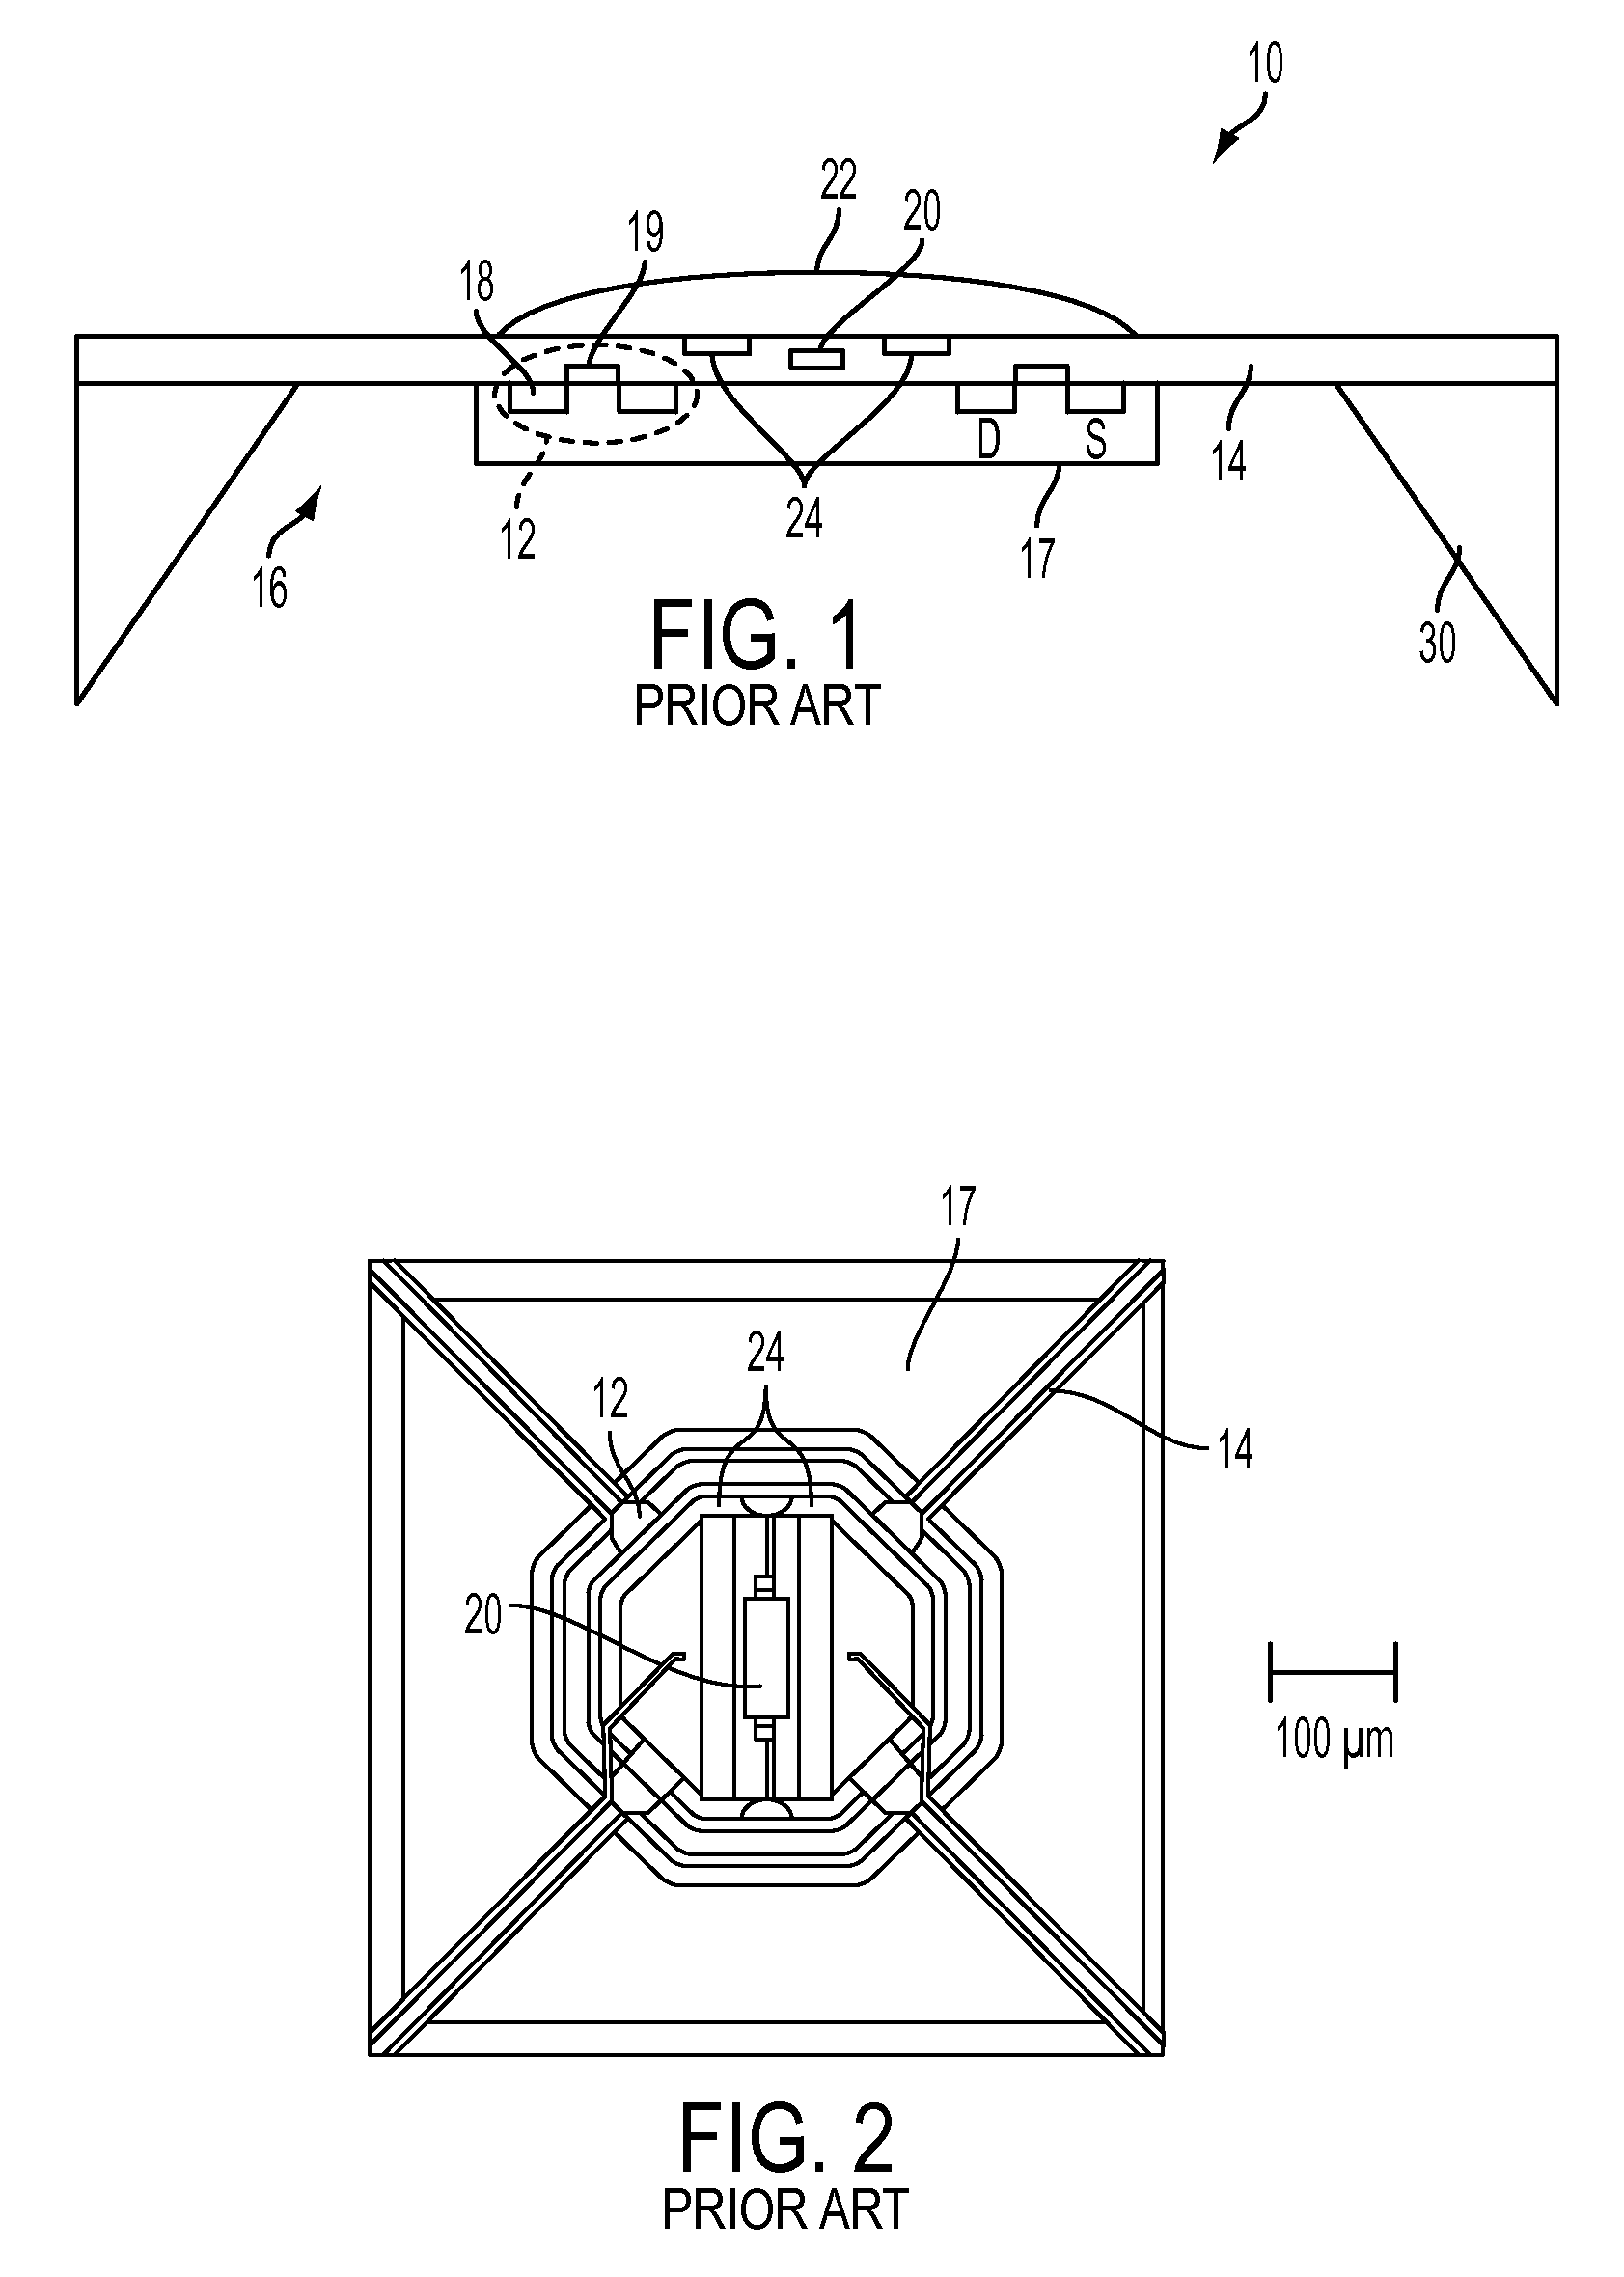 Heating element incorporating an array of transistor micro-heaters for digital image marking